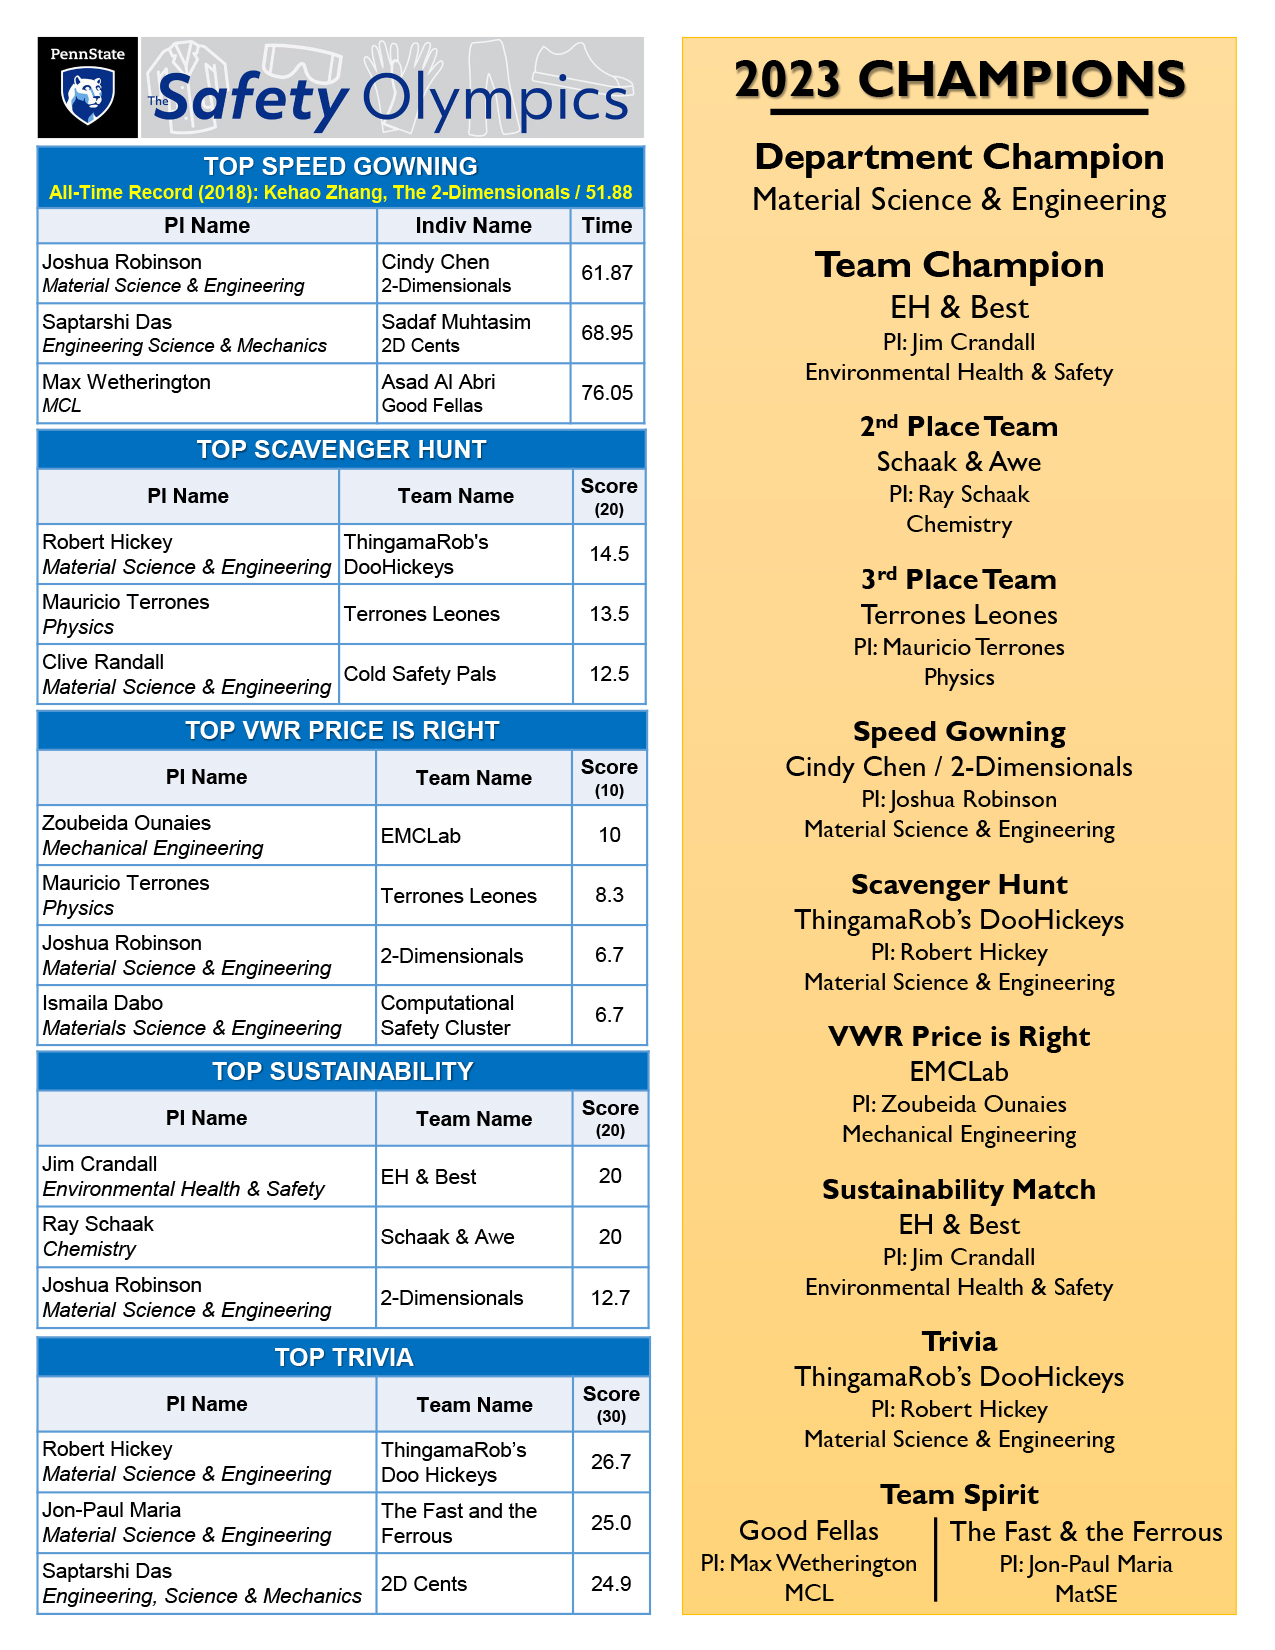 Safety Olympics Results flyer